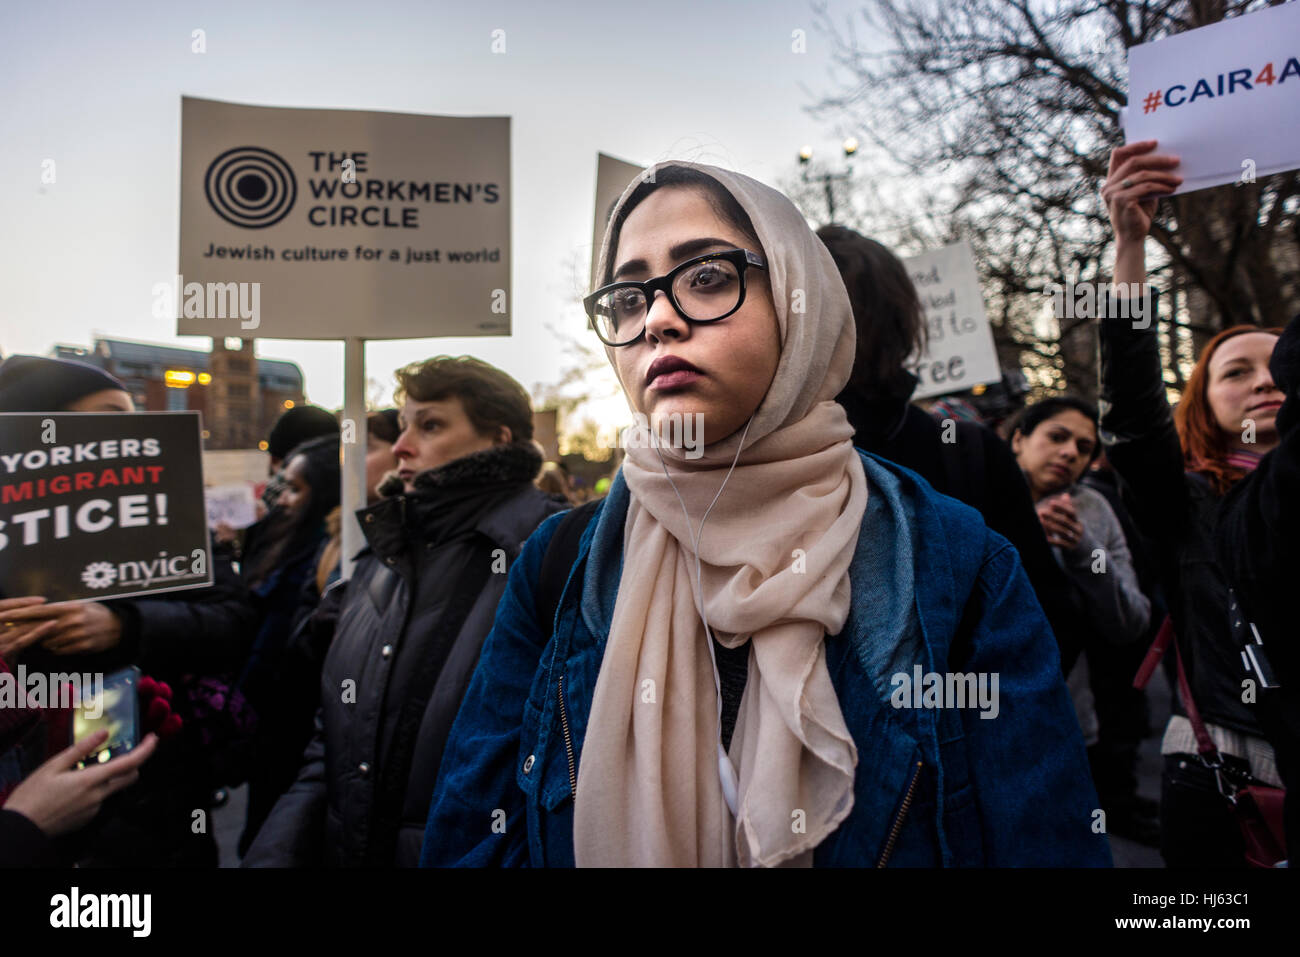 New York, USA. 25th January, 2017. Hours after President Donald Trump signed executive orders to begin building a wall between the US and Mexico, and to increase immigration enforcement, activists rallied in Washington Square Park vowing to defend Muslim and Immigrant rights. Credit: Stacy Walsh Rosenstock / Alamy Live News Stock Photo